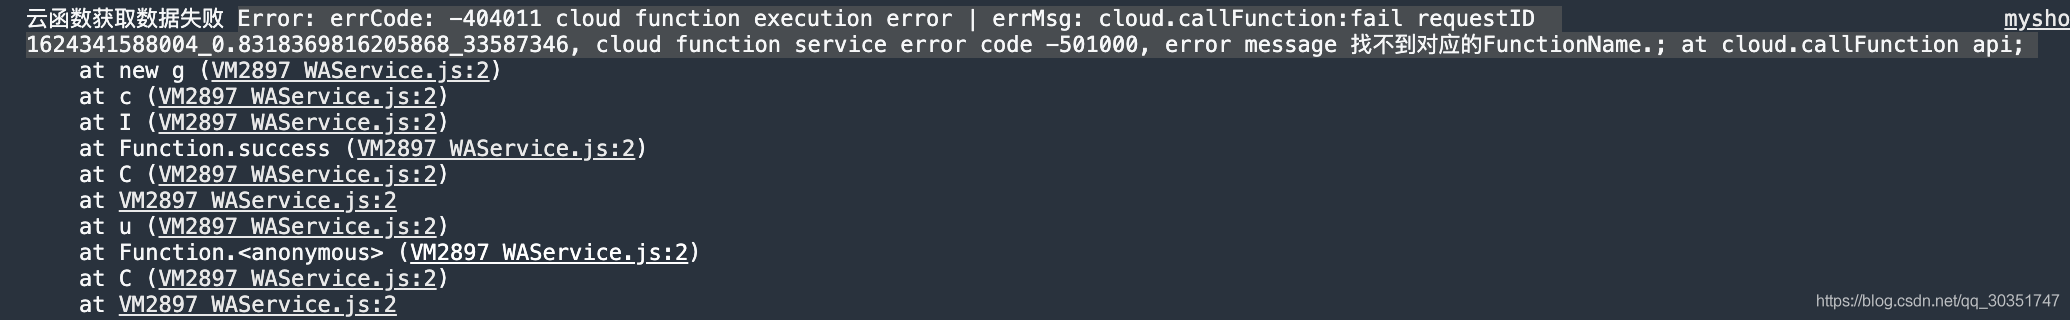 cloud function service error code -501000, error message 找不到对应的FunctionName.； at cloud.callFunction